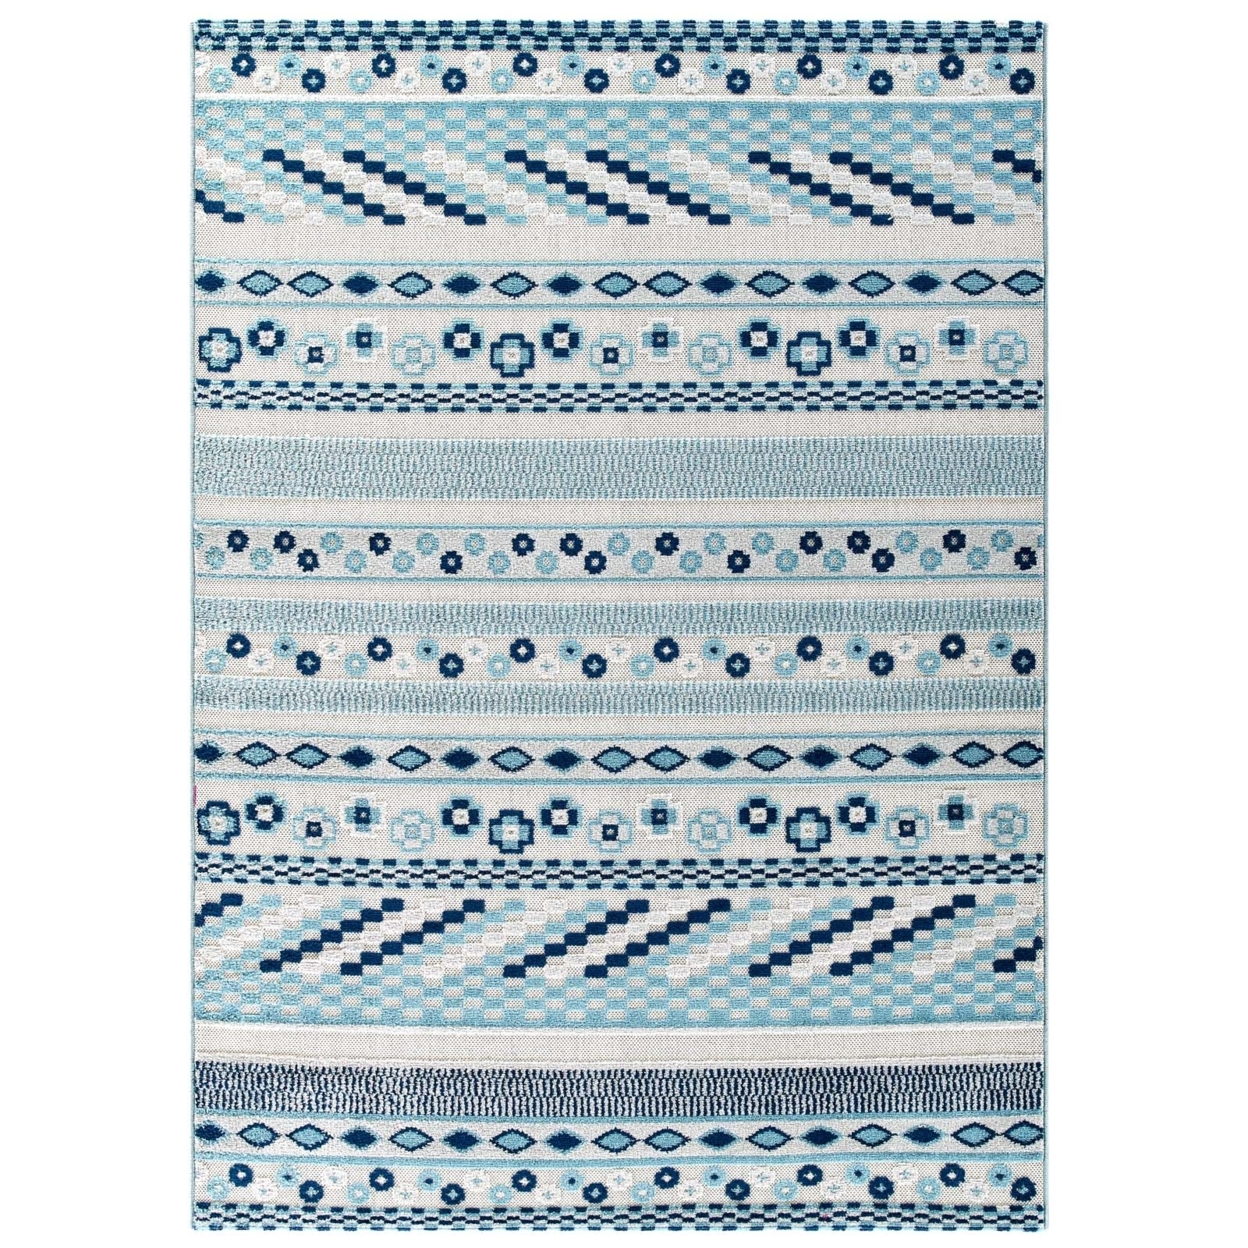 Reflect Cadhla Vintage Abstract Geometric Lattice 5x8 Indoor And Outdoor Area Rug, Ivory And Blue